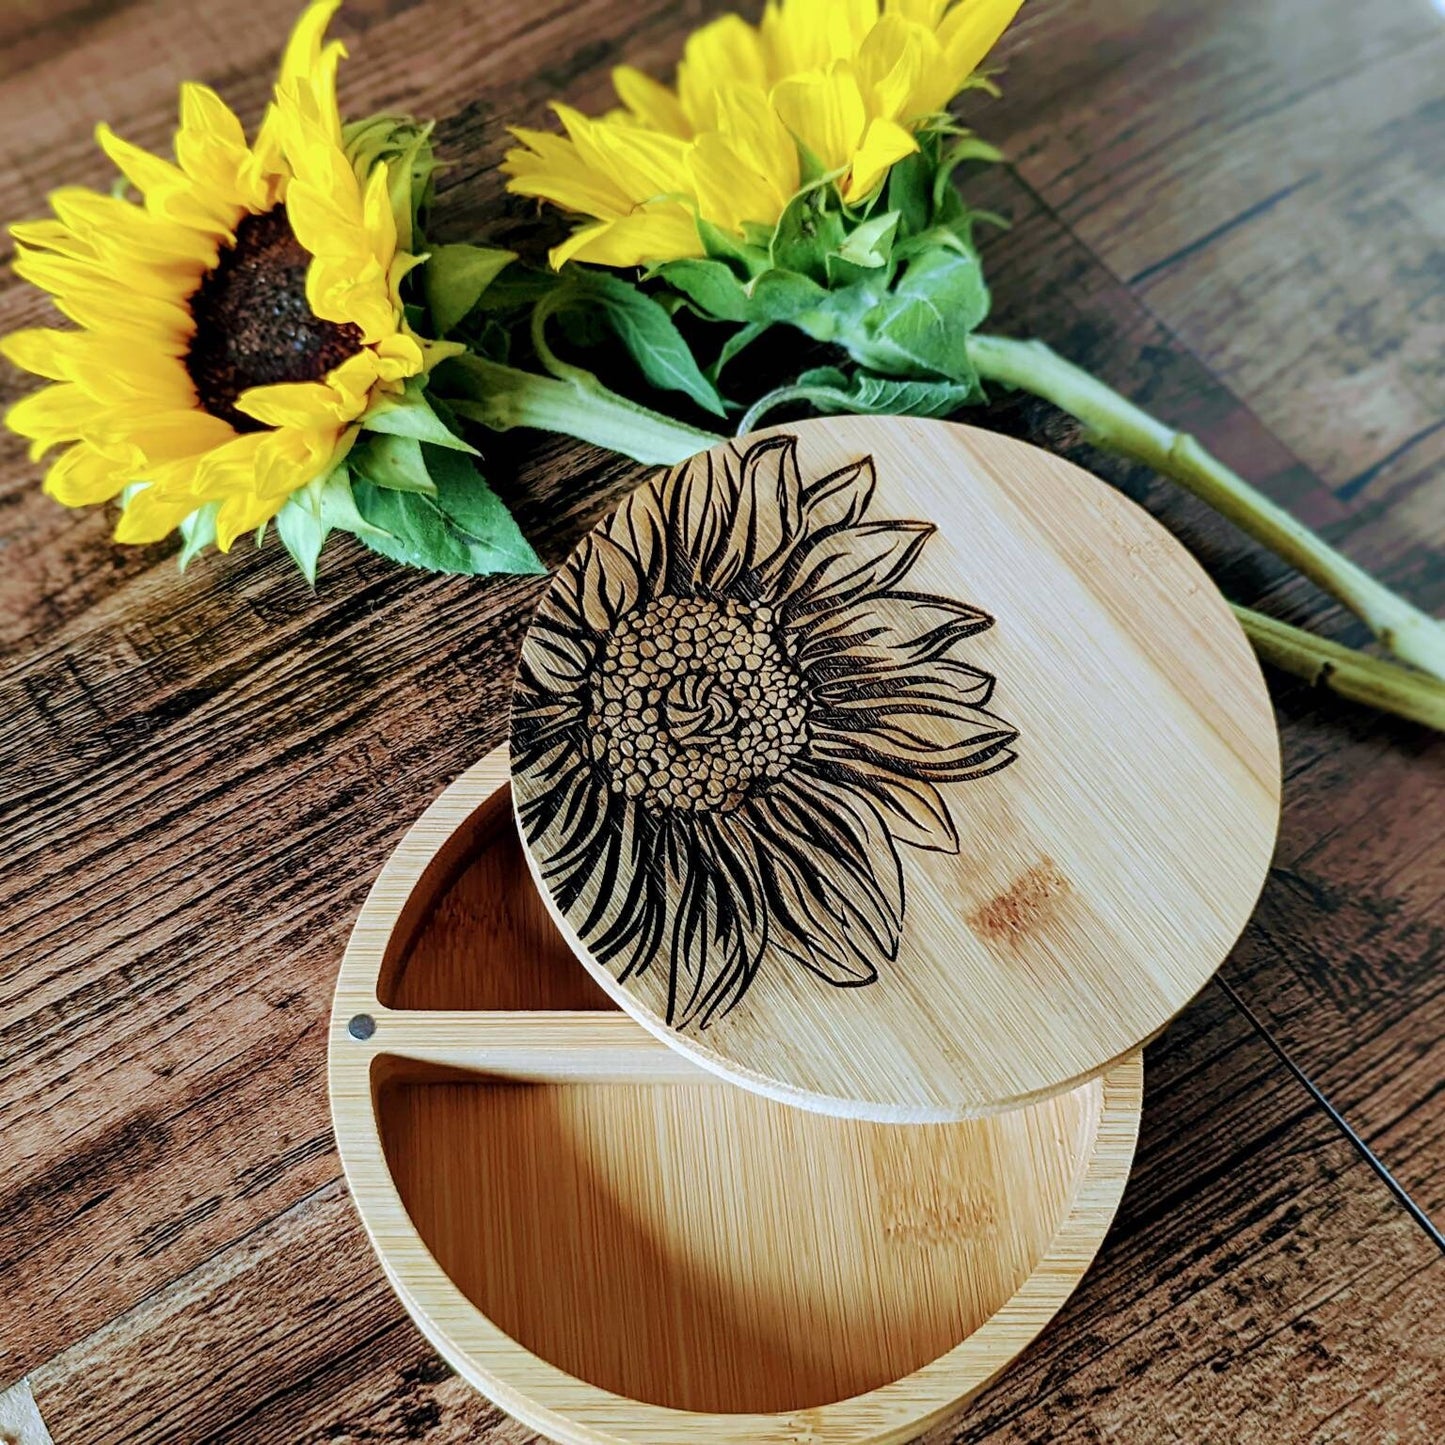 Sunflower laser engraved bamboo salt box. With 2 separate compartments Mother's day gift. Housewarming gift